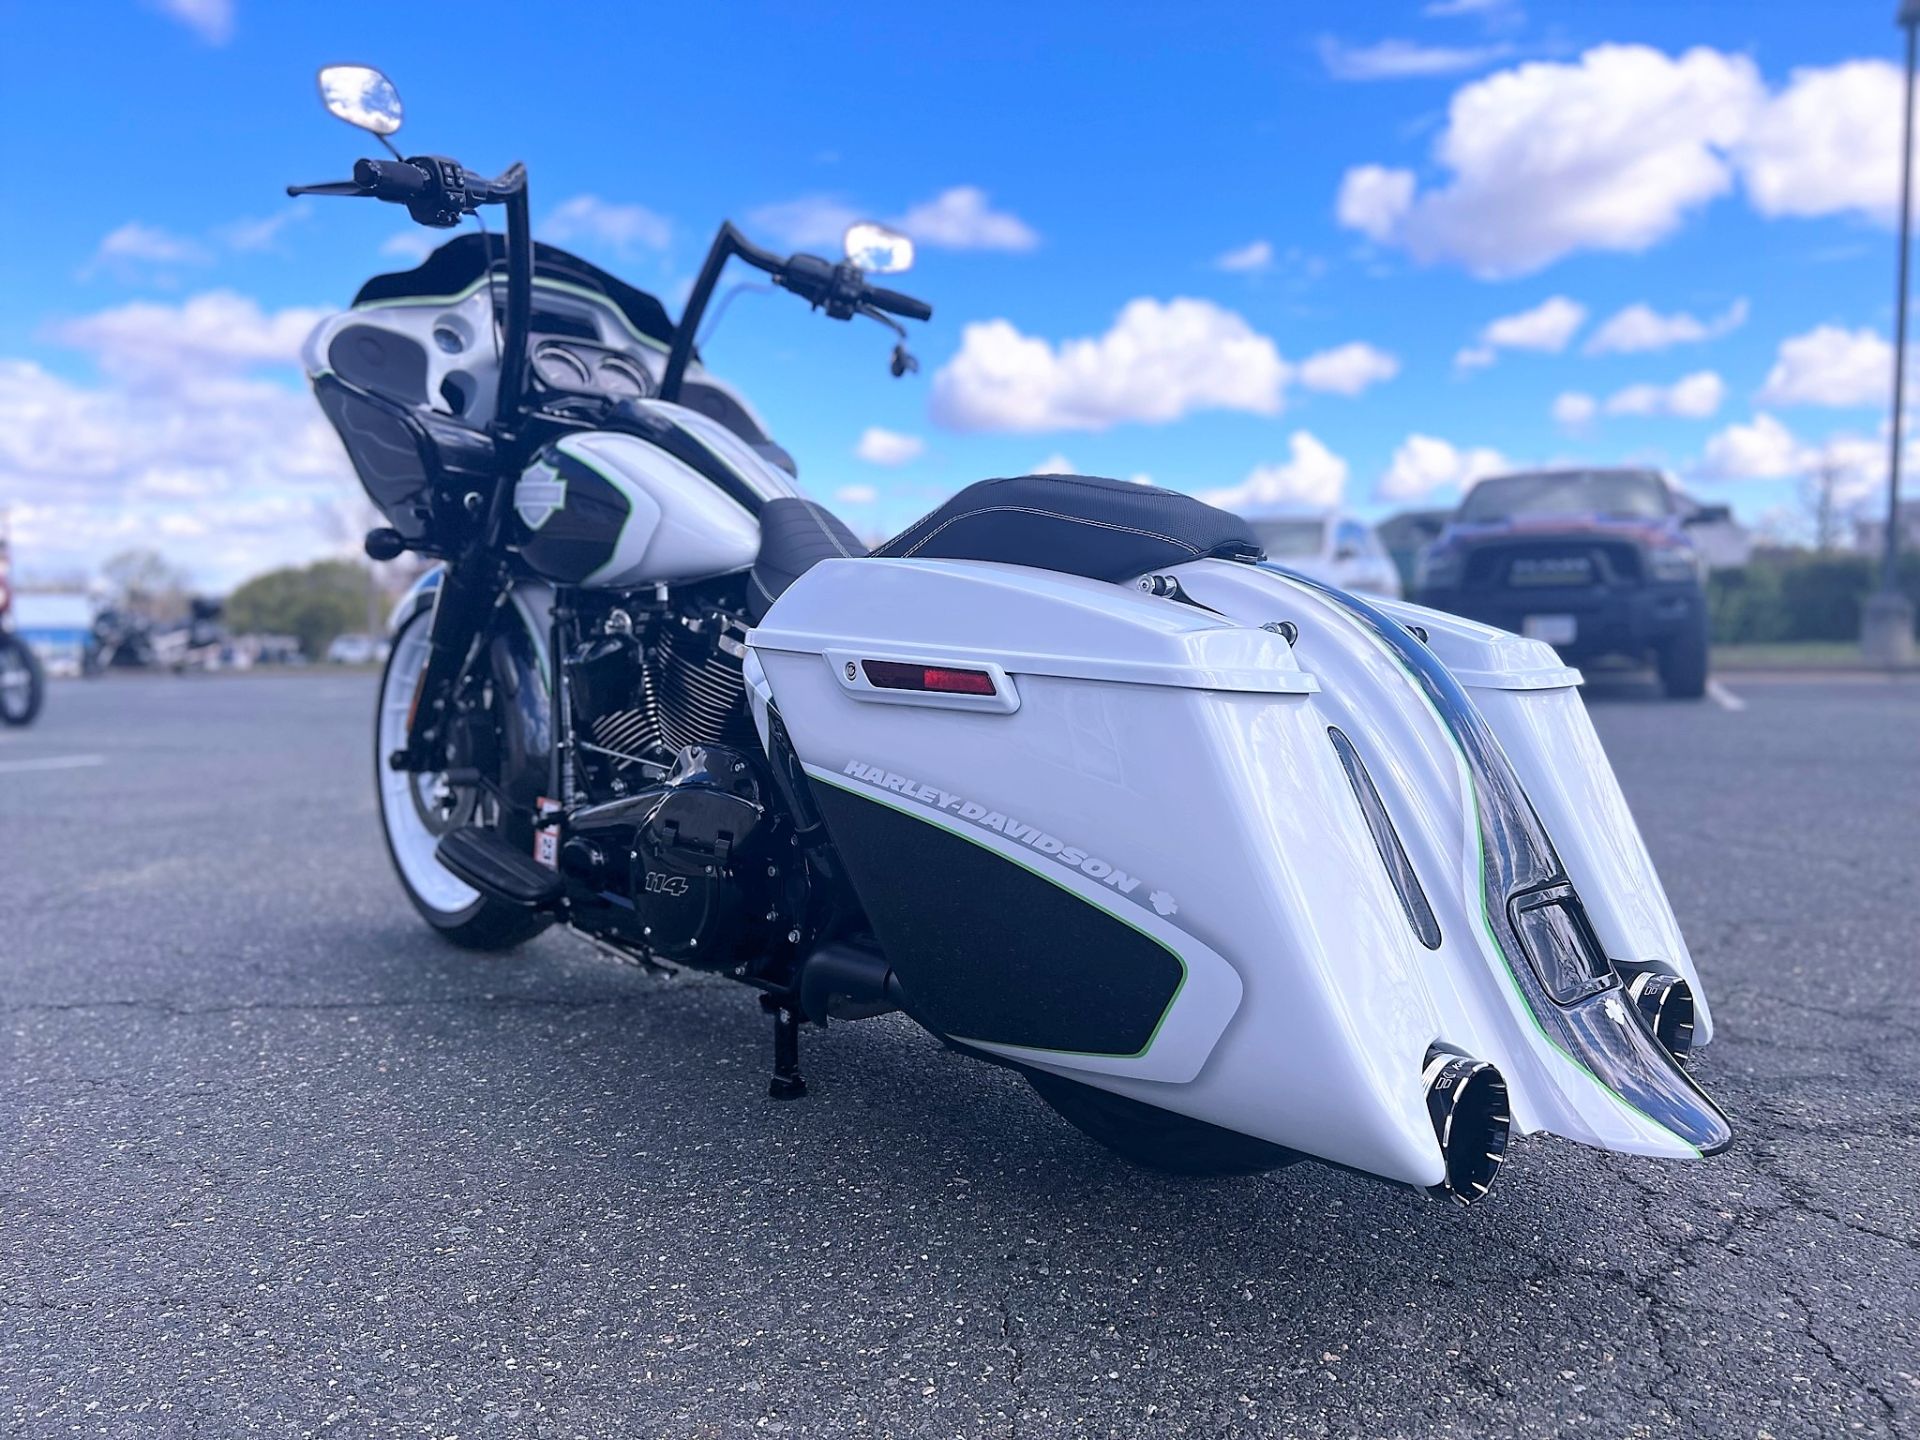 2020 Harley-Davidson Road Glide Special in Dumfries, Virginia - Photo 3